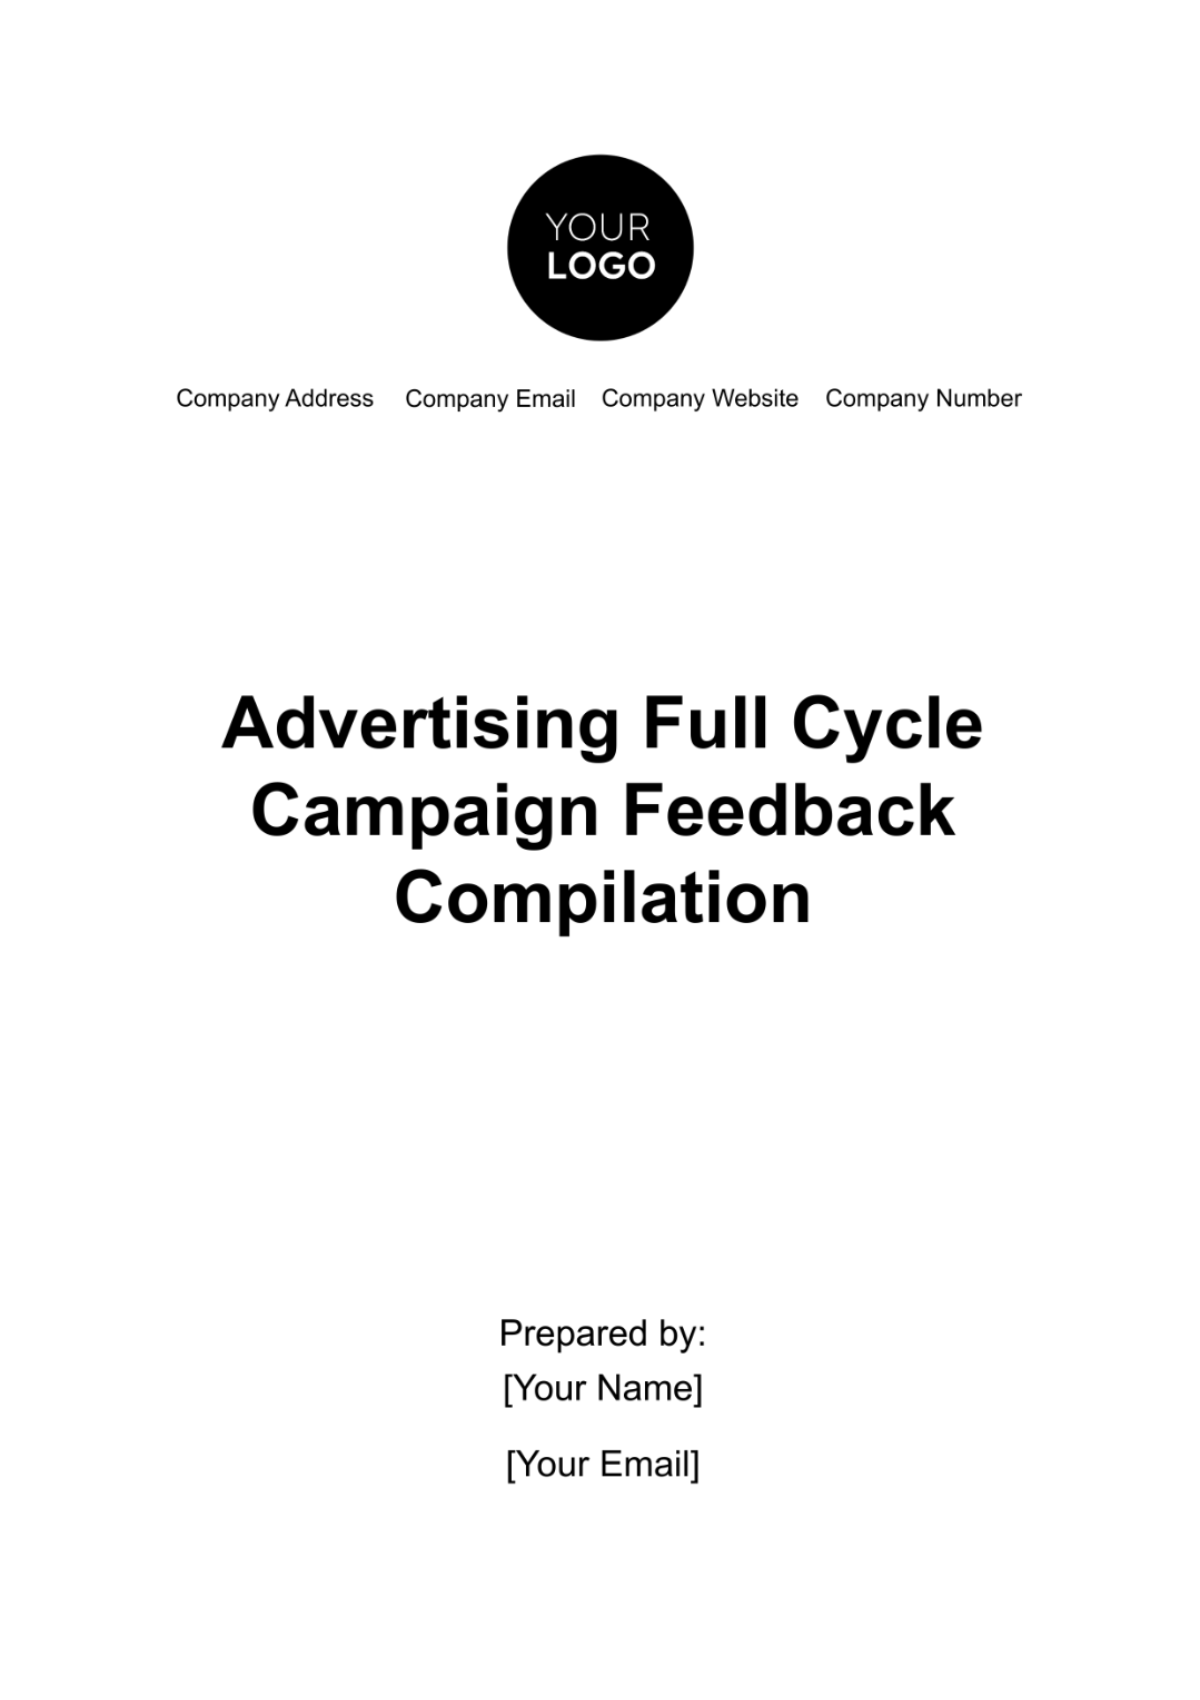 Free Advertising Full Cycle Campaign Feedback Compilation Template